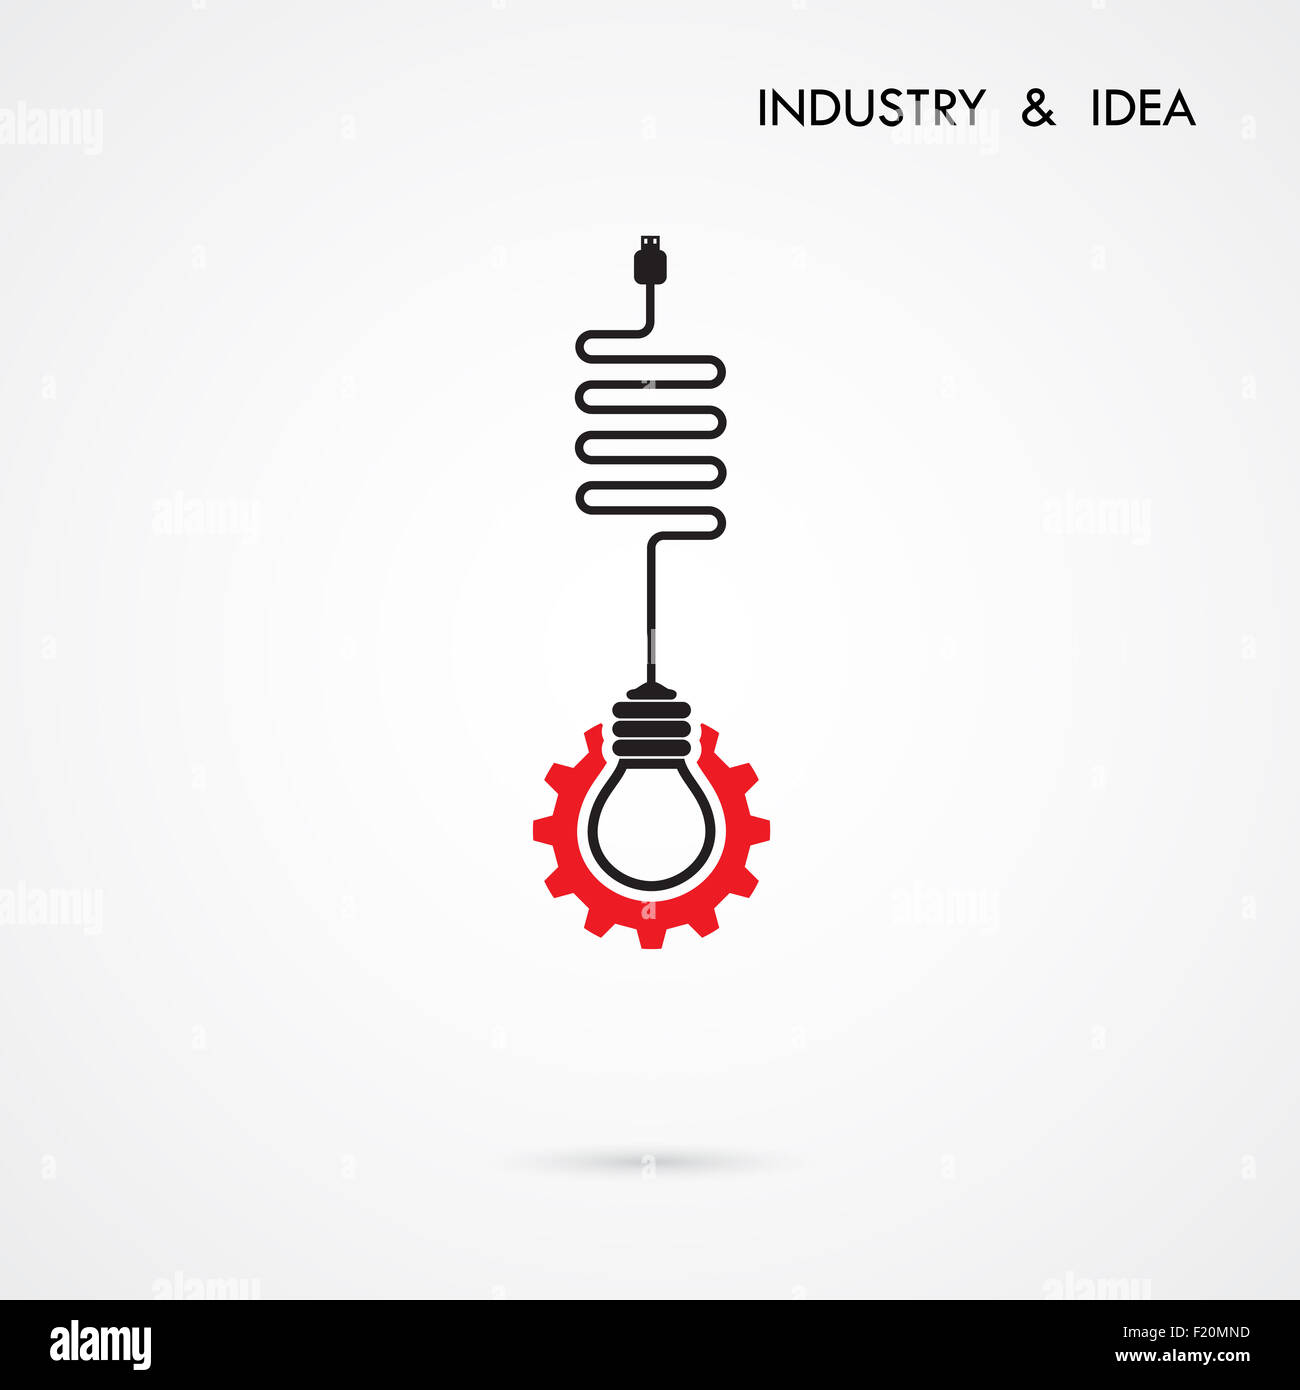 Creative light bulb and gear abstract design banner template. Corporate business industrial creative logotype symbol. Stock Photo